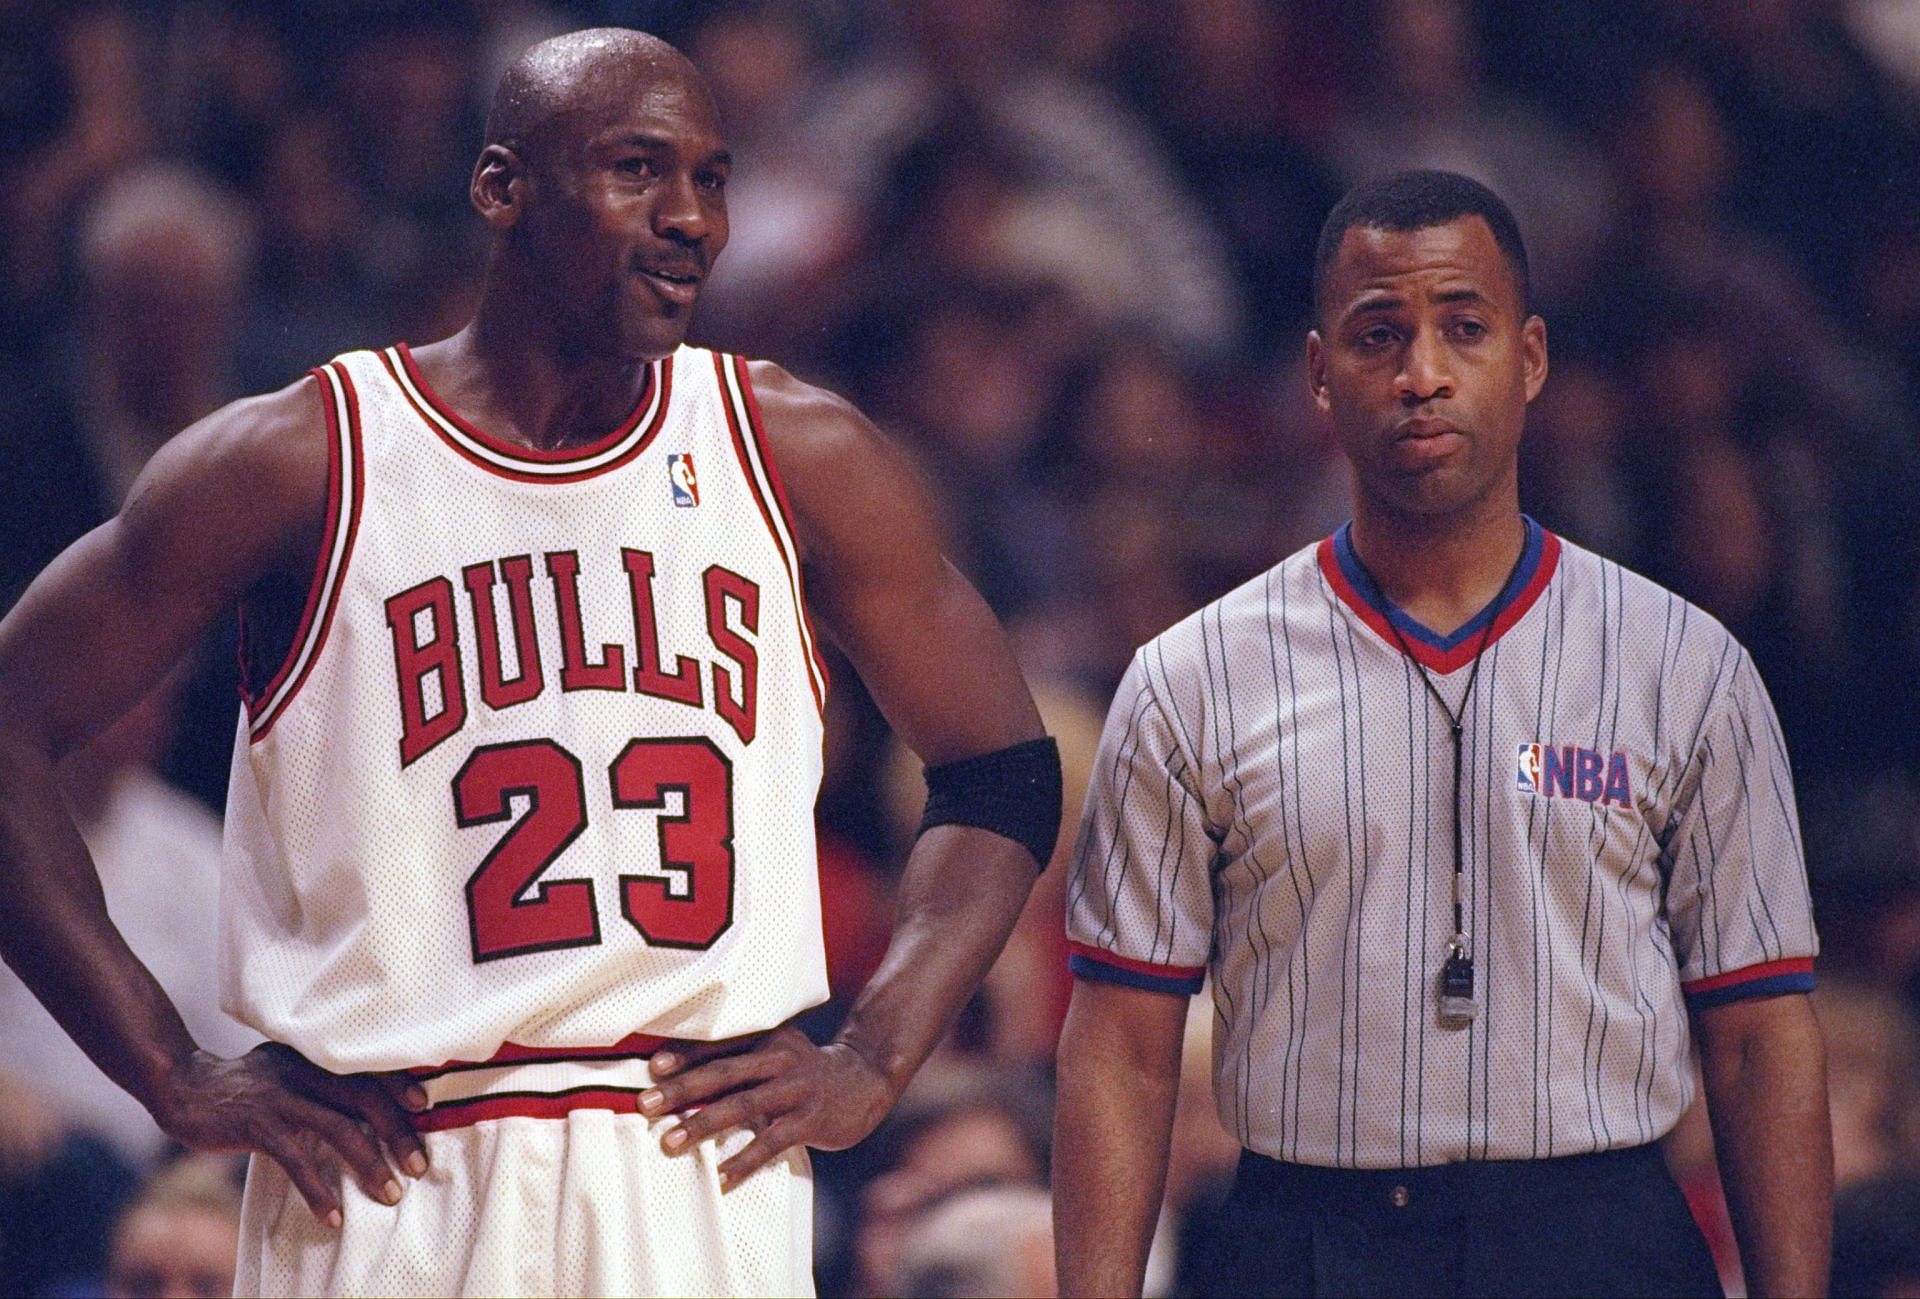 Guard Michael Jordan of the Chicago Bulls confers with an official